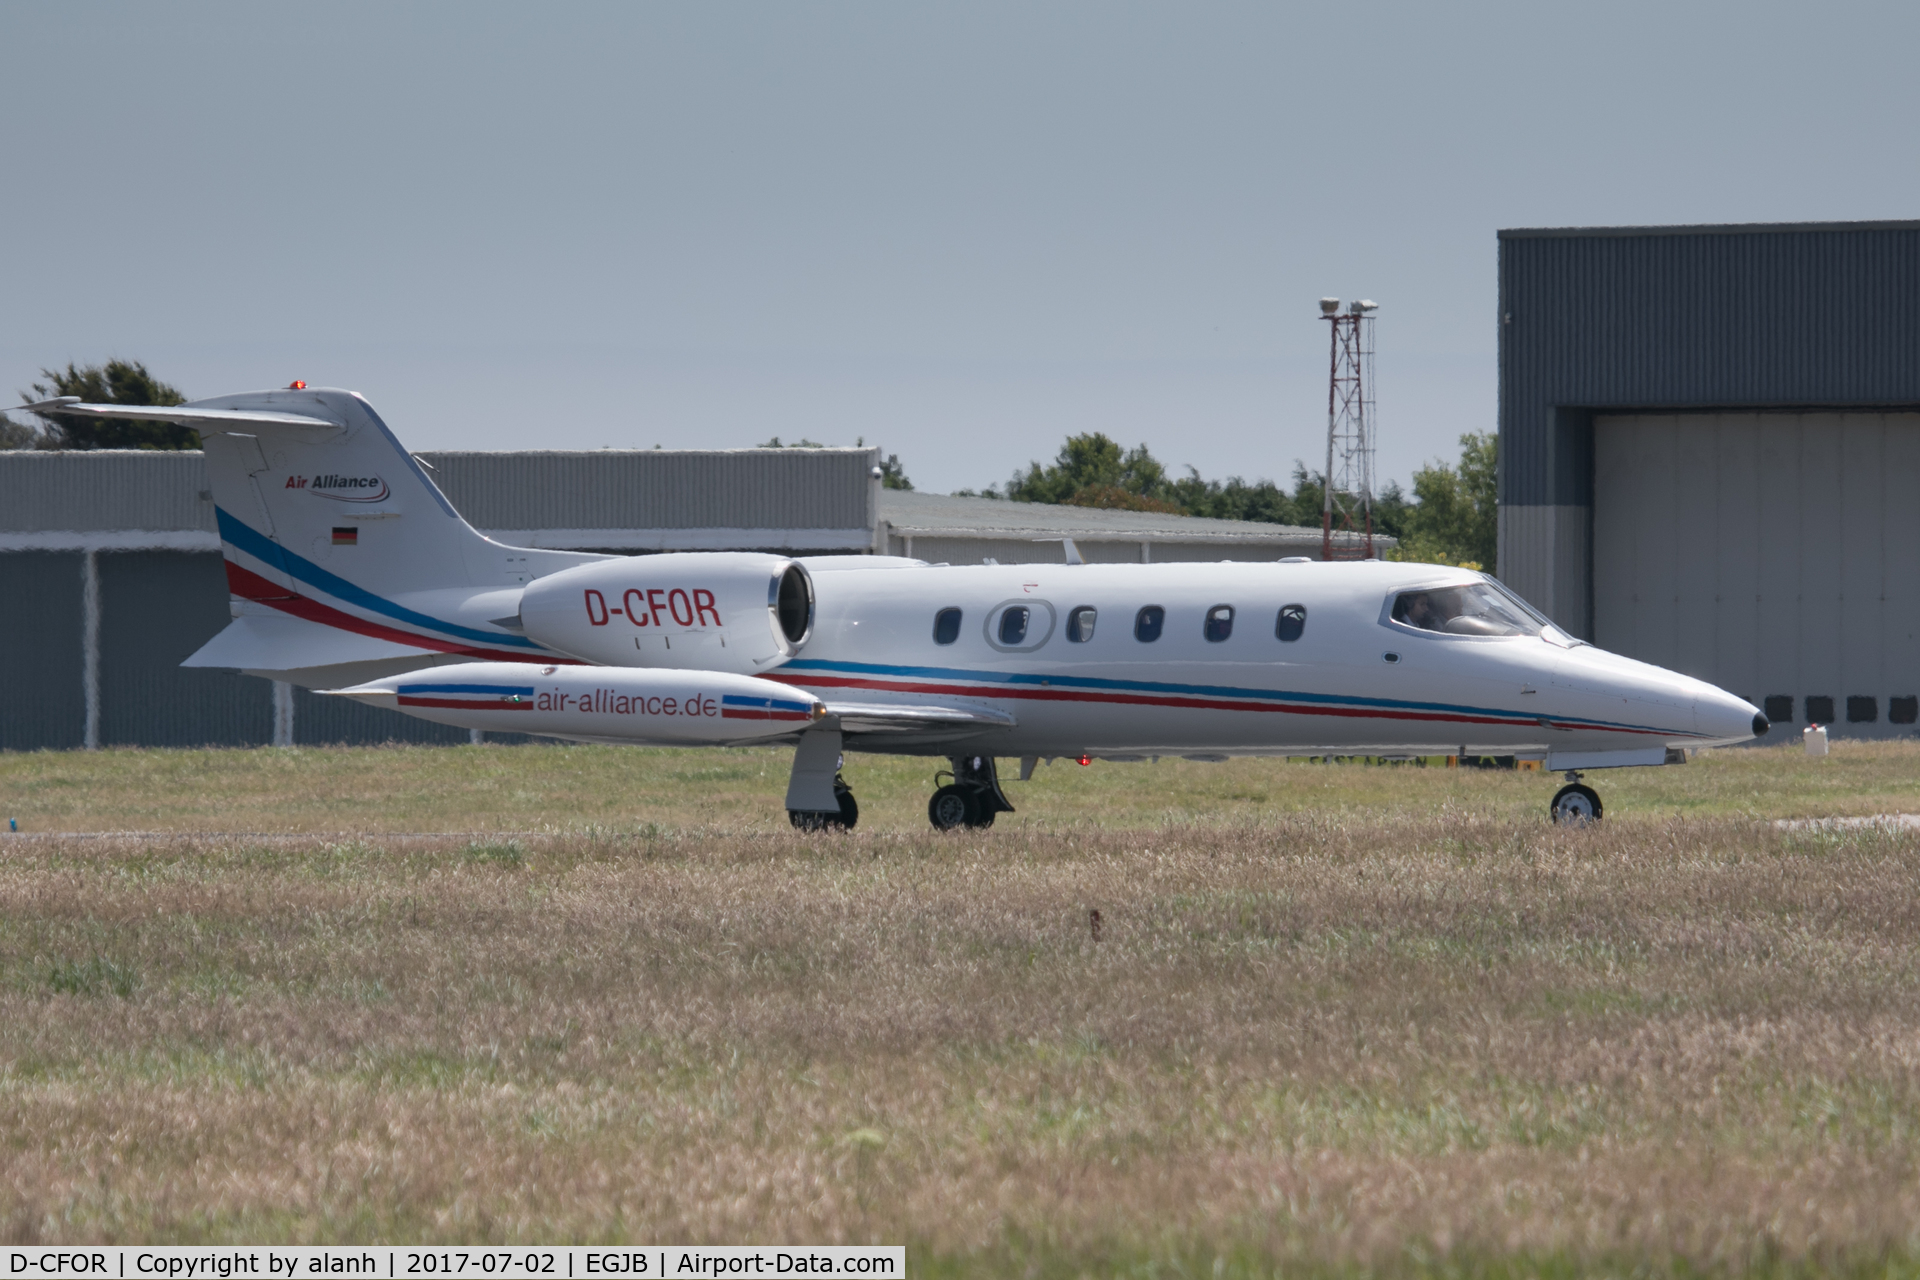 D-CFOR, 1990 Learjet 35A C/N 35A-656, Lined up for departure on 27 in Guernsey